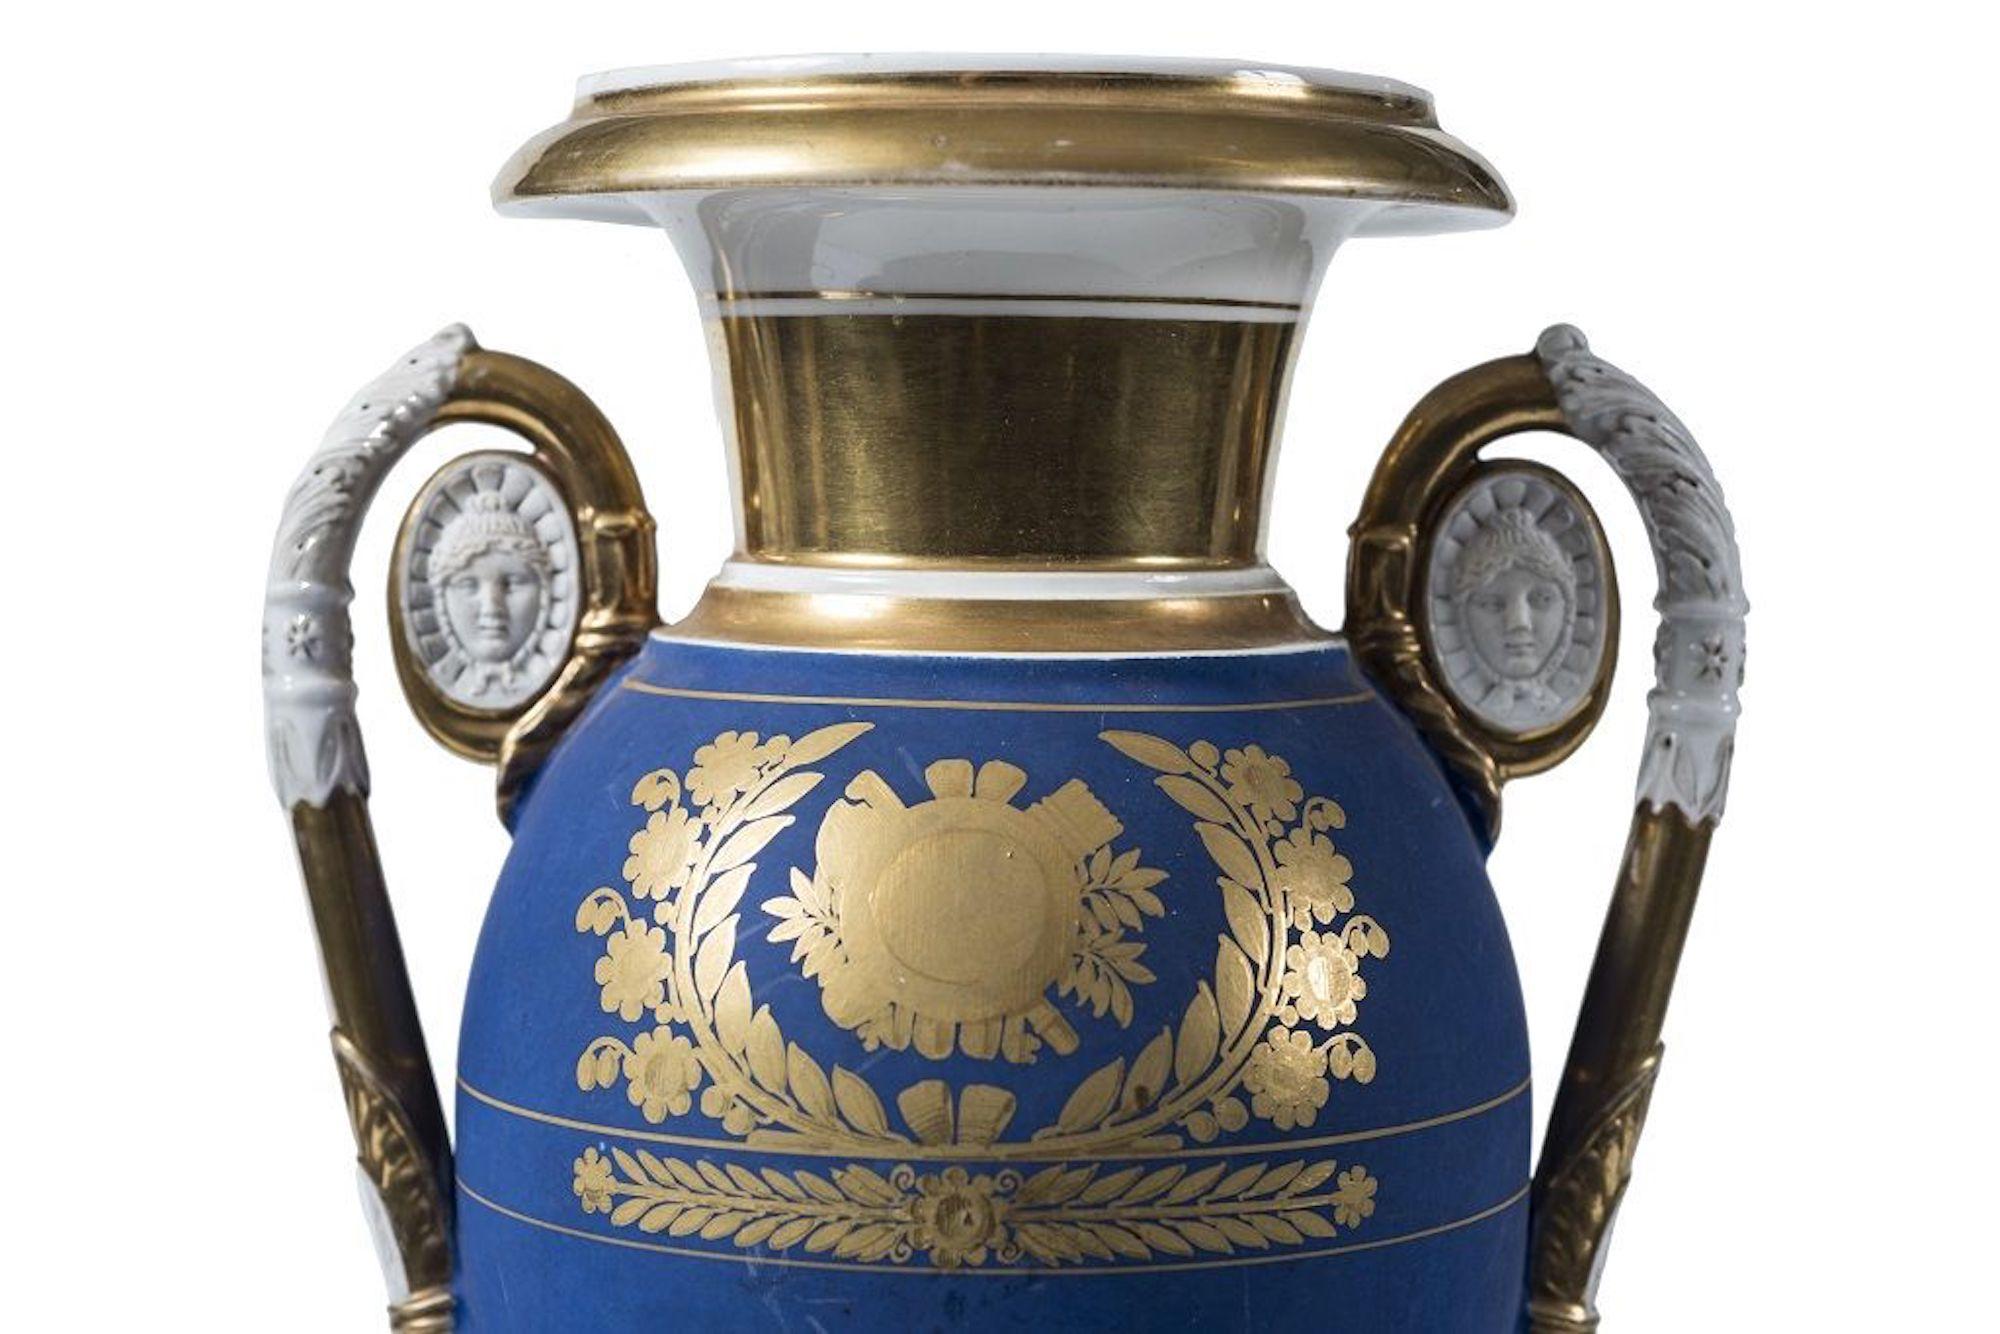 These cobalt porcelain vases are original decorative objects realized in France in the 19th century, during the imperial period.

This refined couple of vases is realized in gold and cobalt blue.

Very good conditions.

The imperial style is